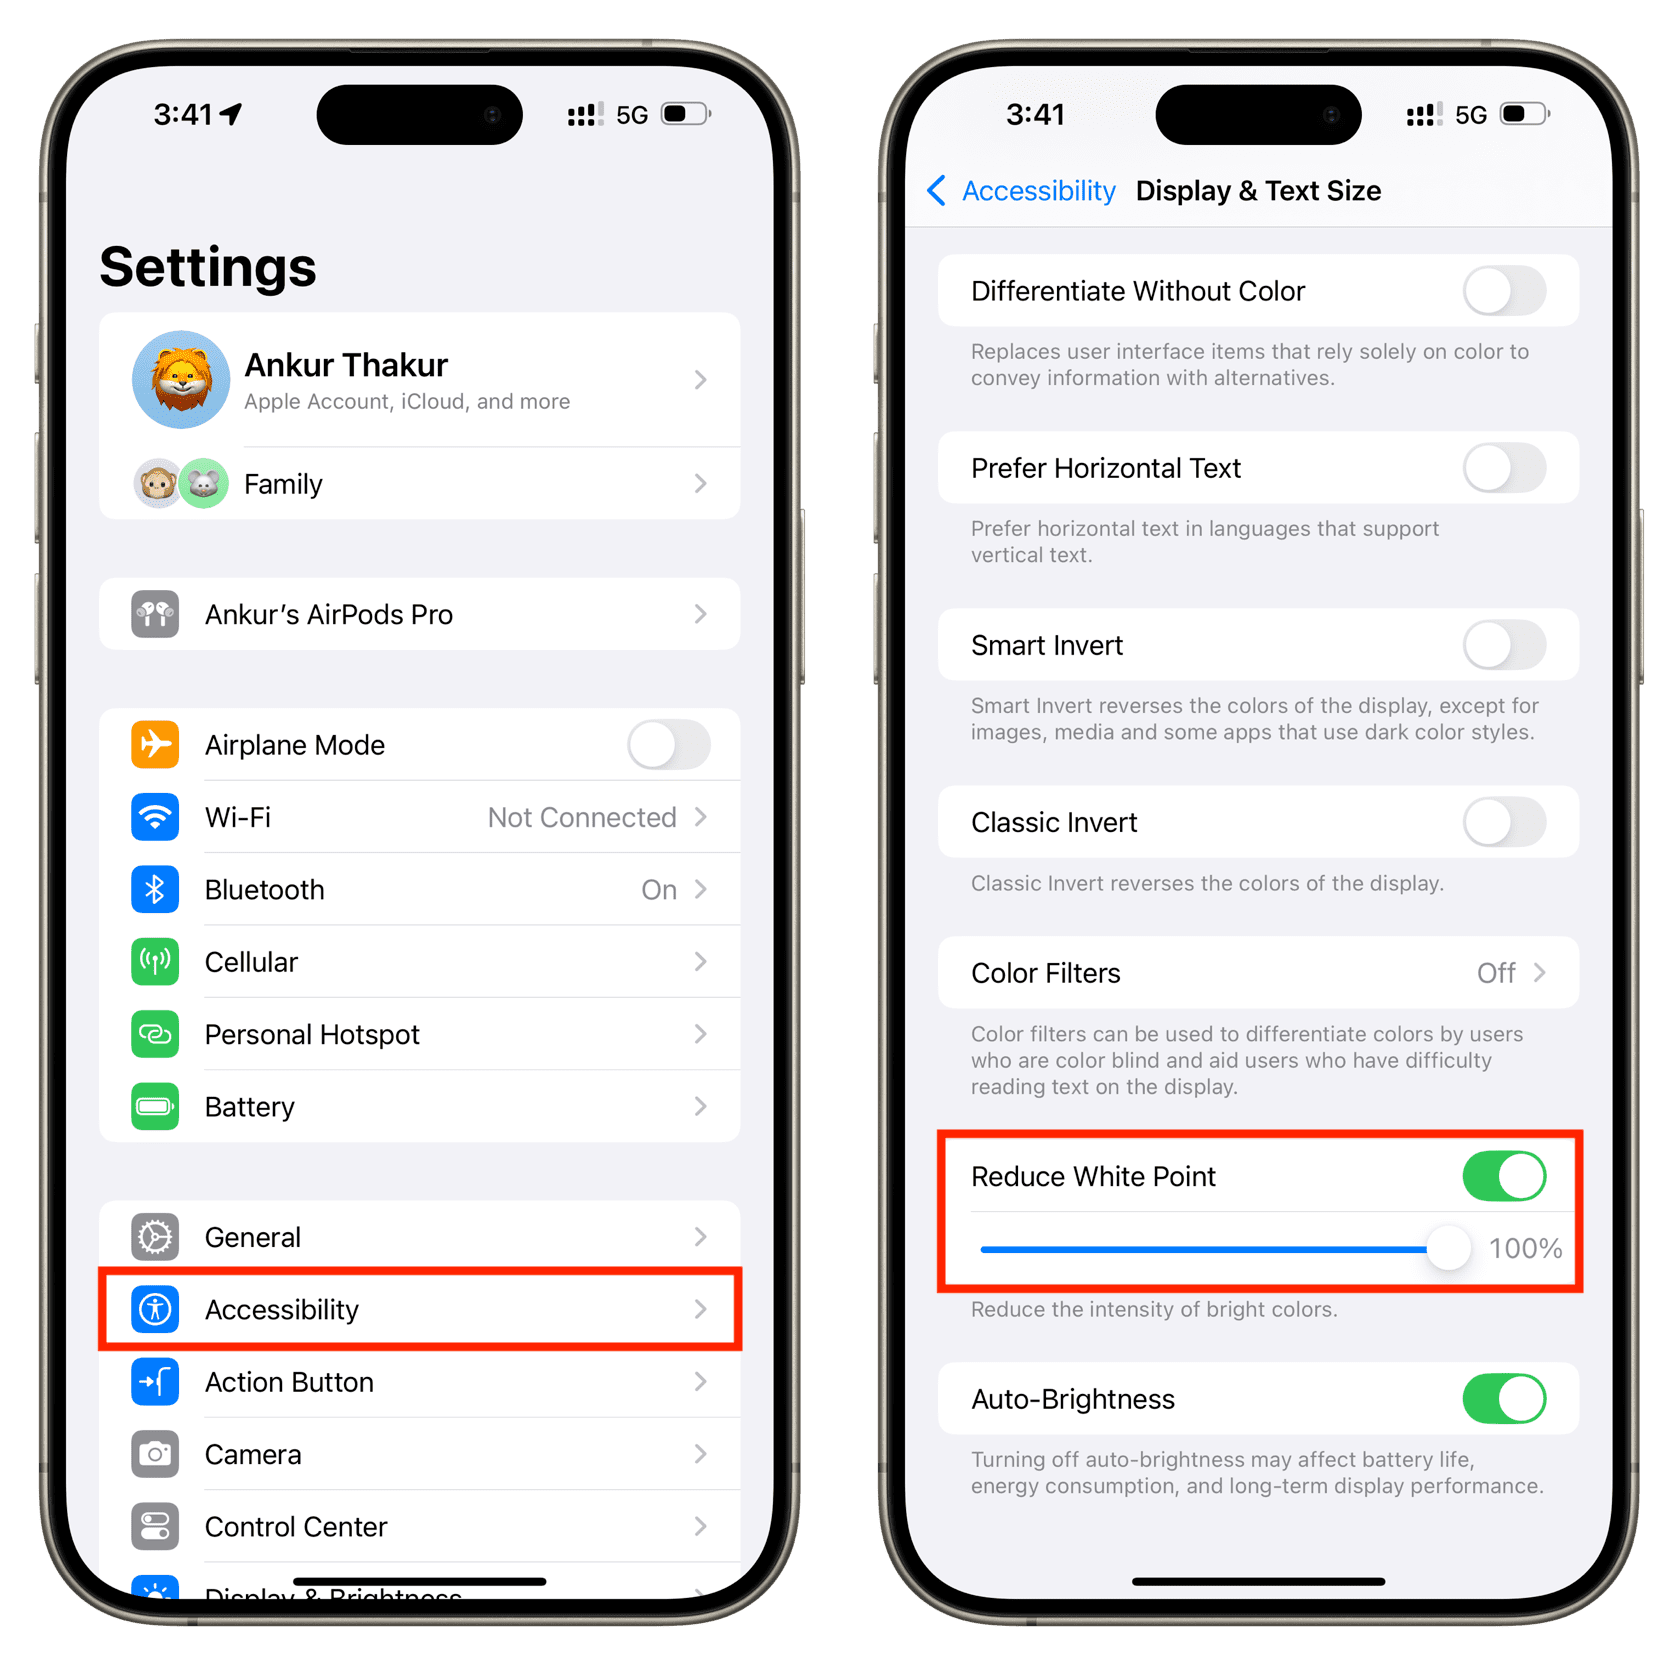 Adjust Reduce White Point in iPhone Accessibility settings